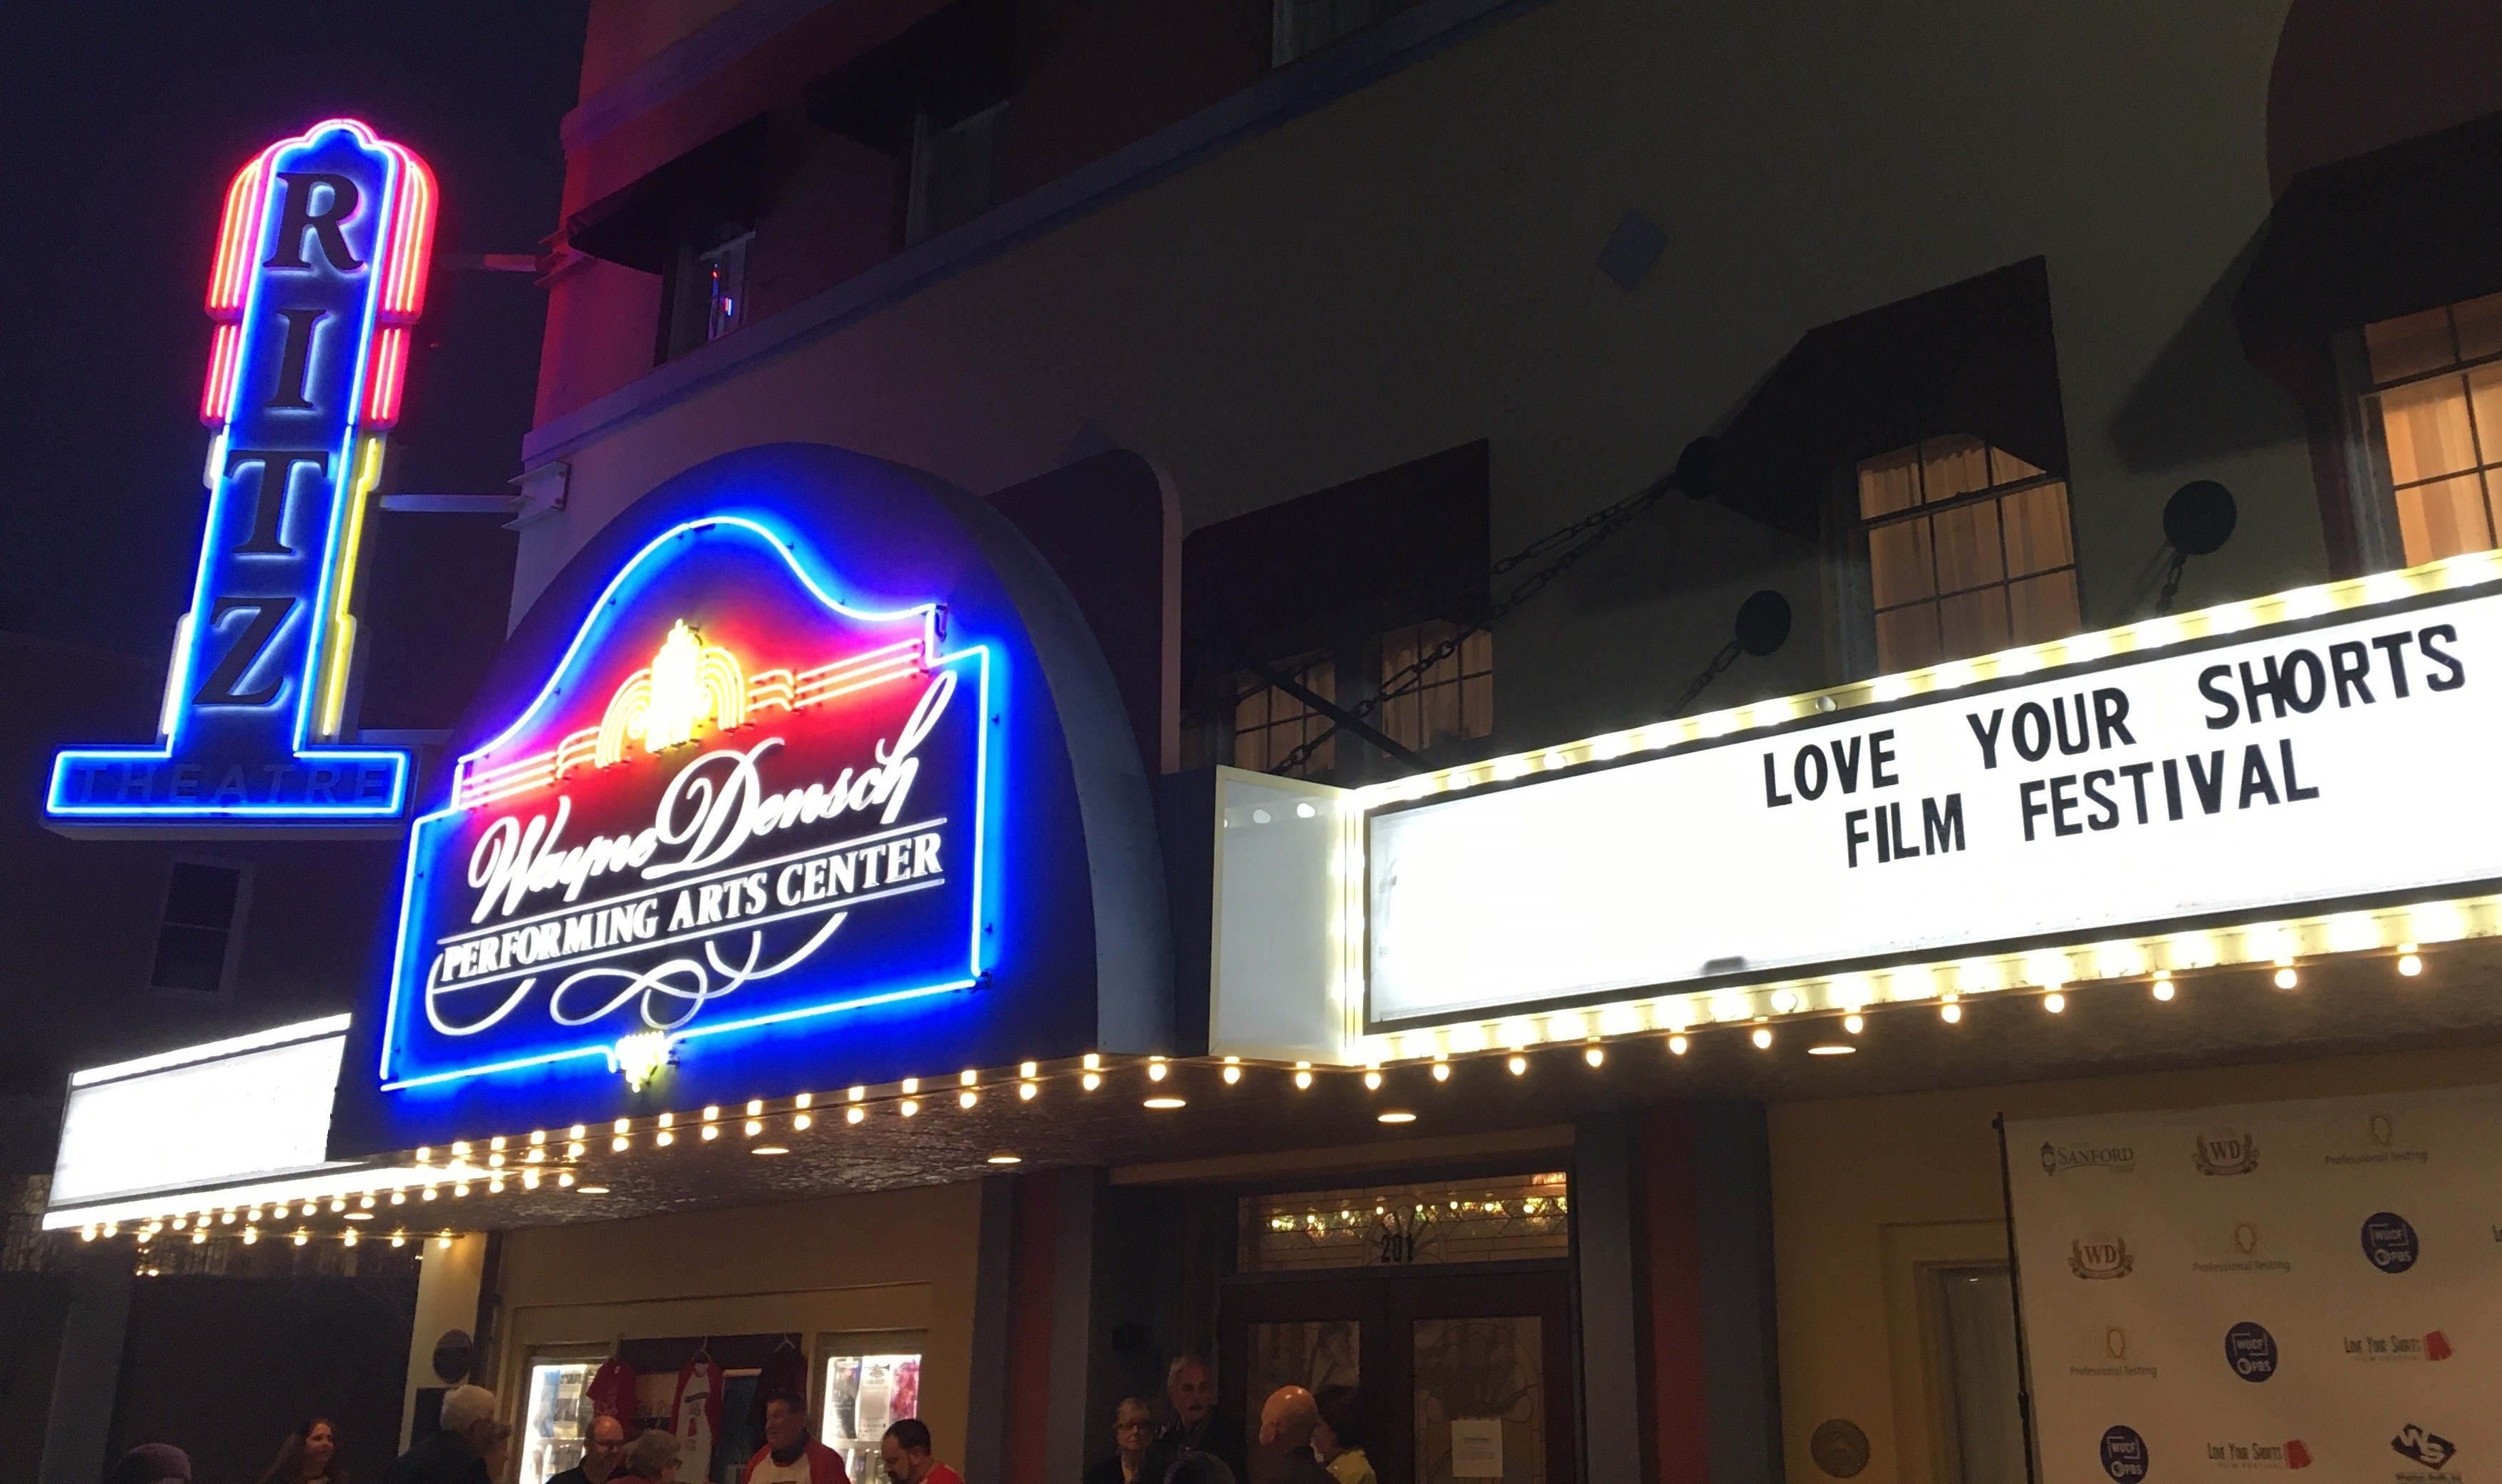 Sanford's Love Your Shorts Film Festival to held both in-person and virtually in 2021 | Blogs